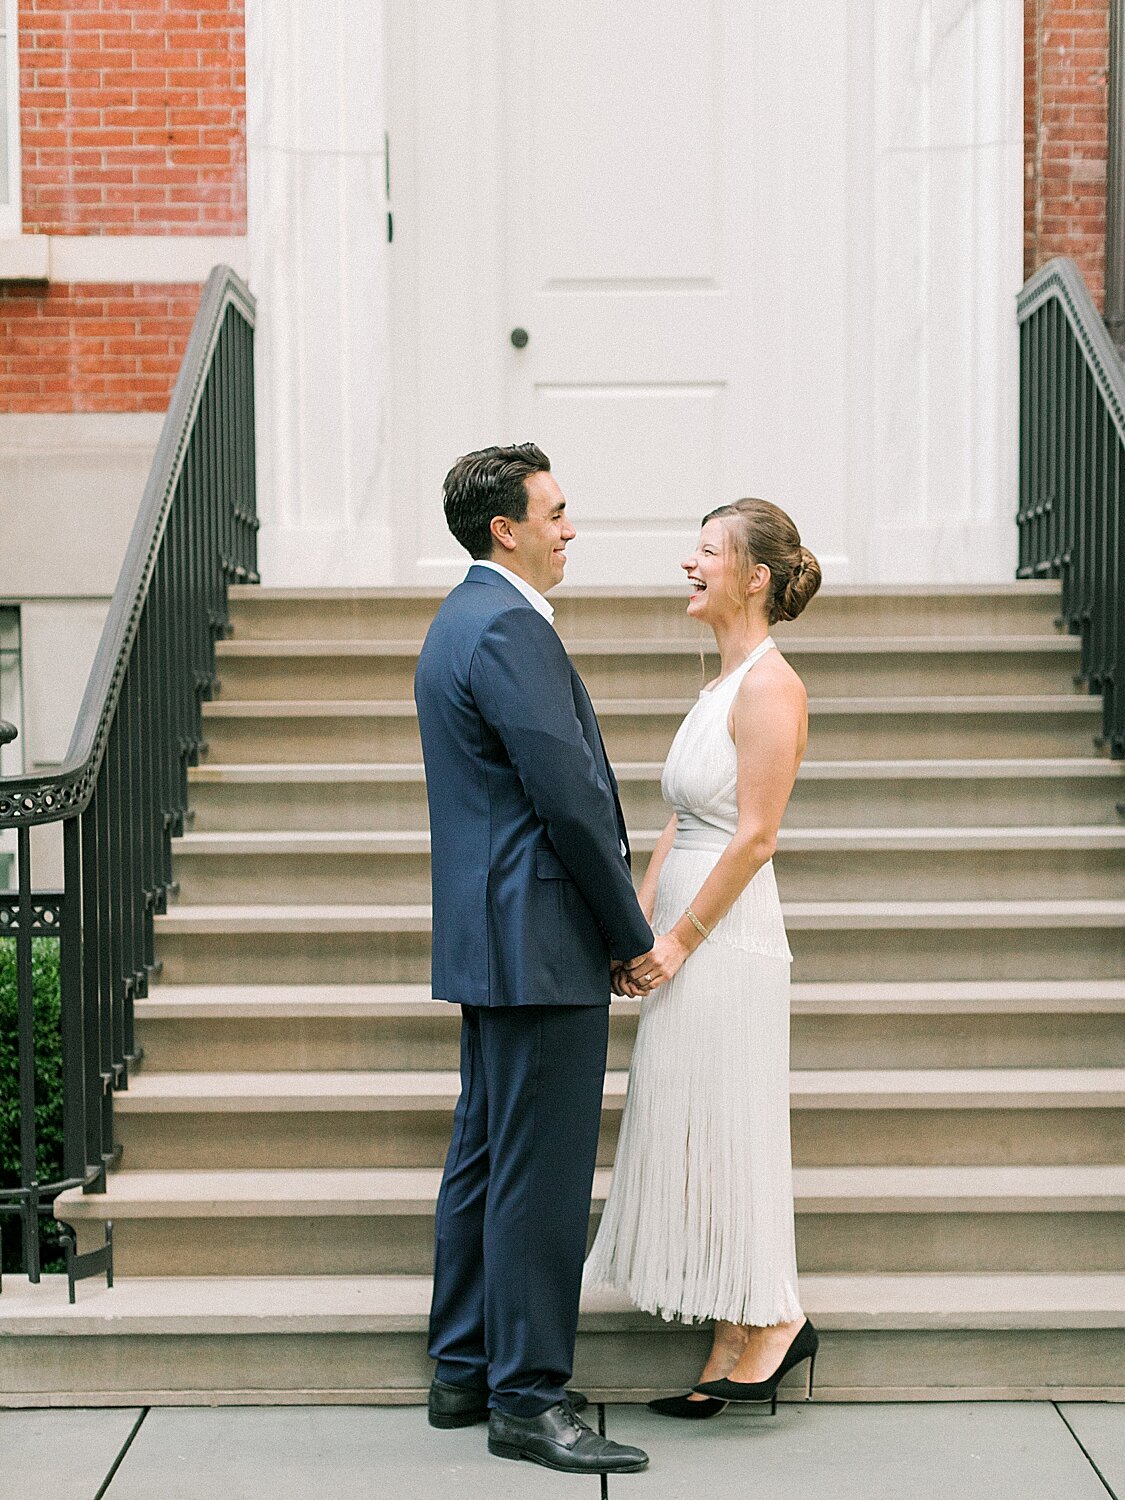 bride and groom pose by steps | Asher Gardner Photography | Gramercy Park Engagement Session